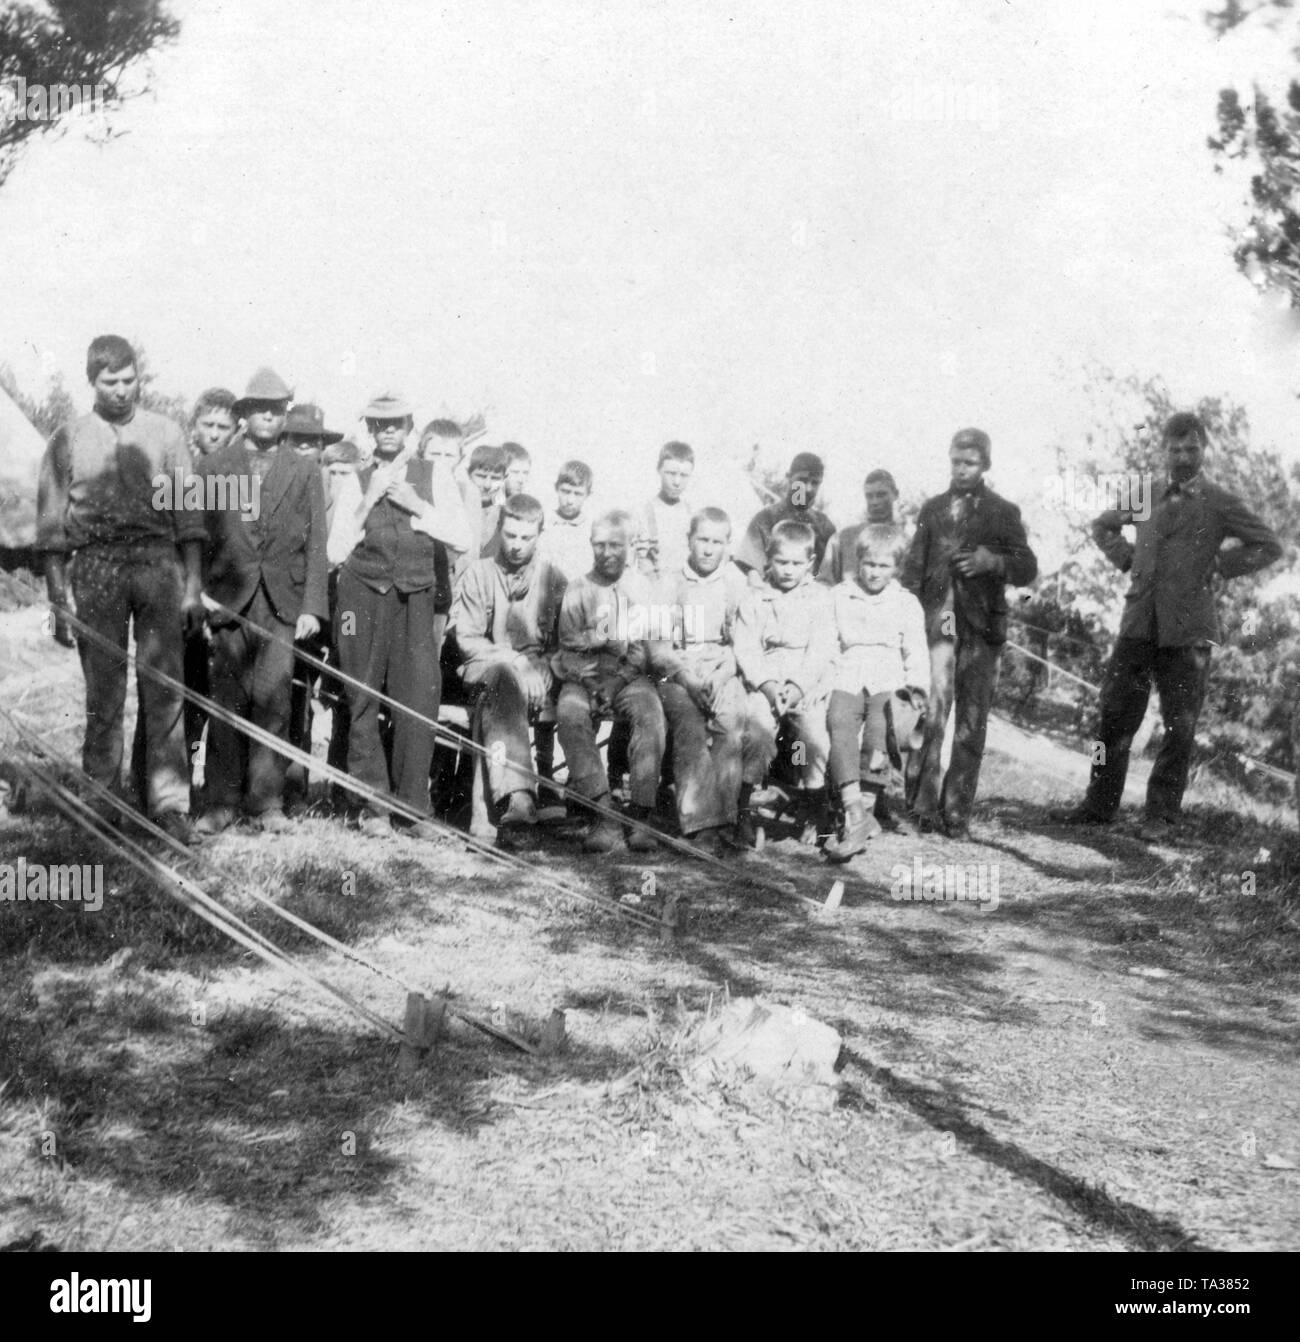 Captive Boers from South Africa, concentration camps 1899-1902: Boers in a prison camp on the Bermudas - boys' school class. Stock Photo